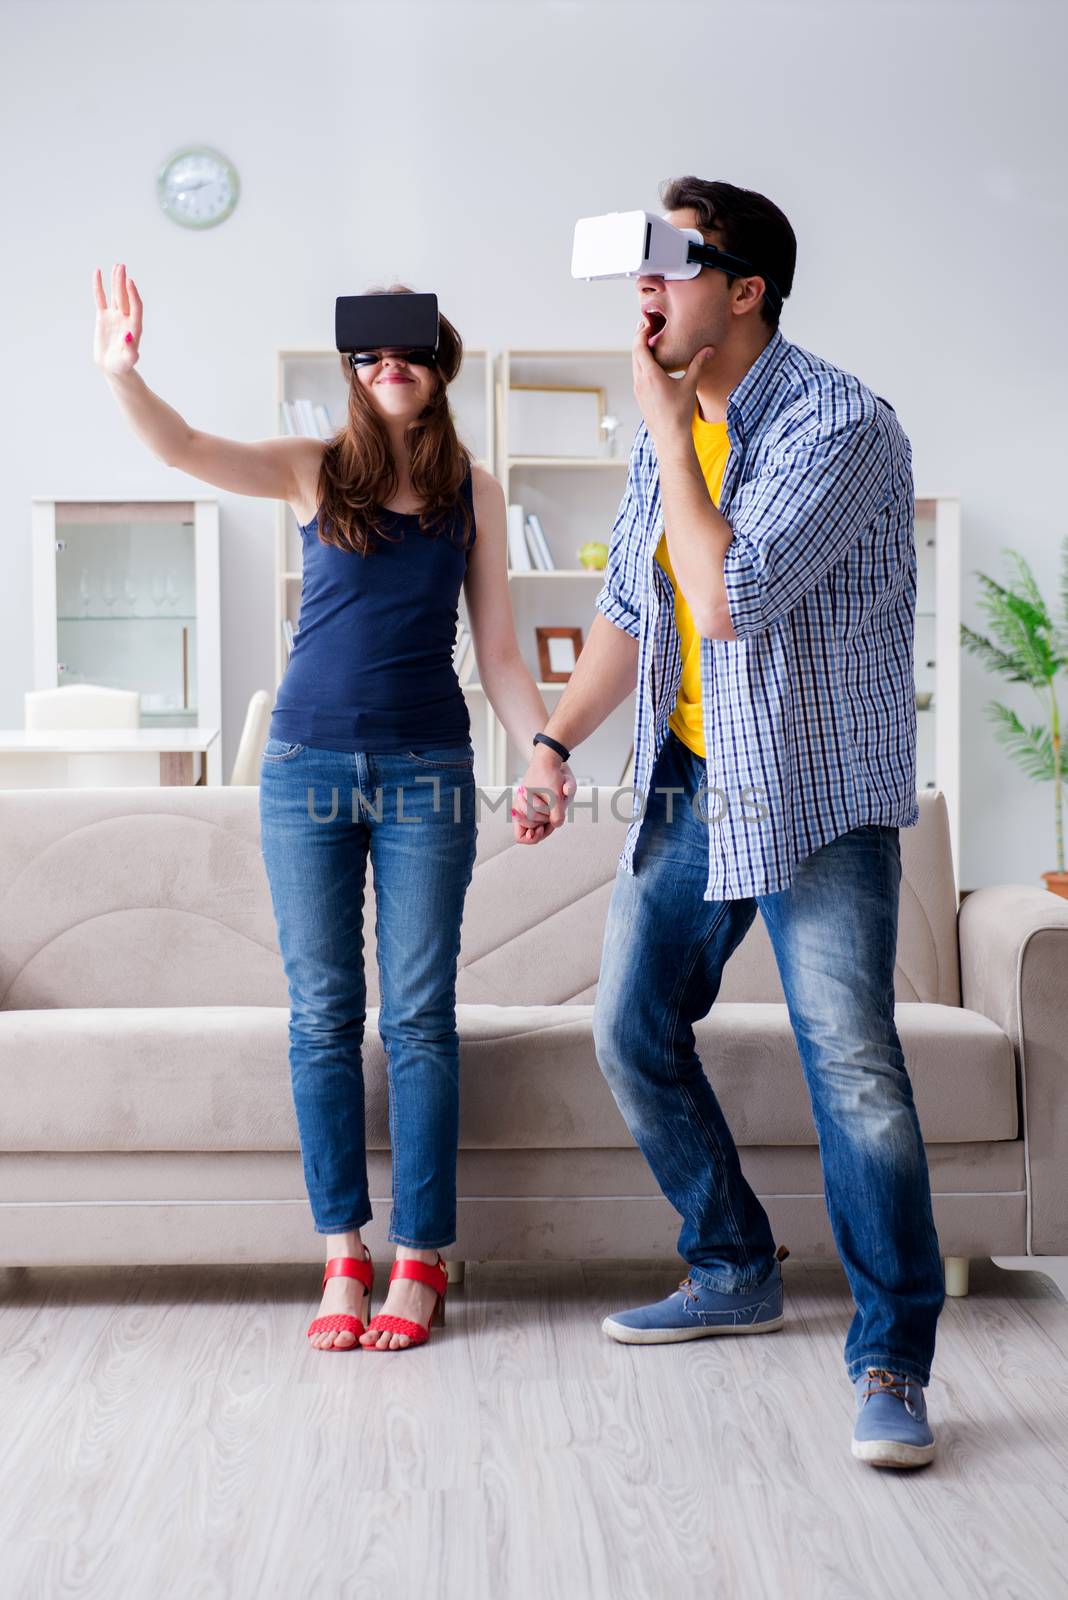 Young family playing games with virtual reality glasses by Elnur